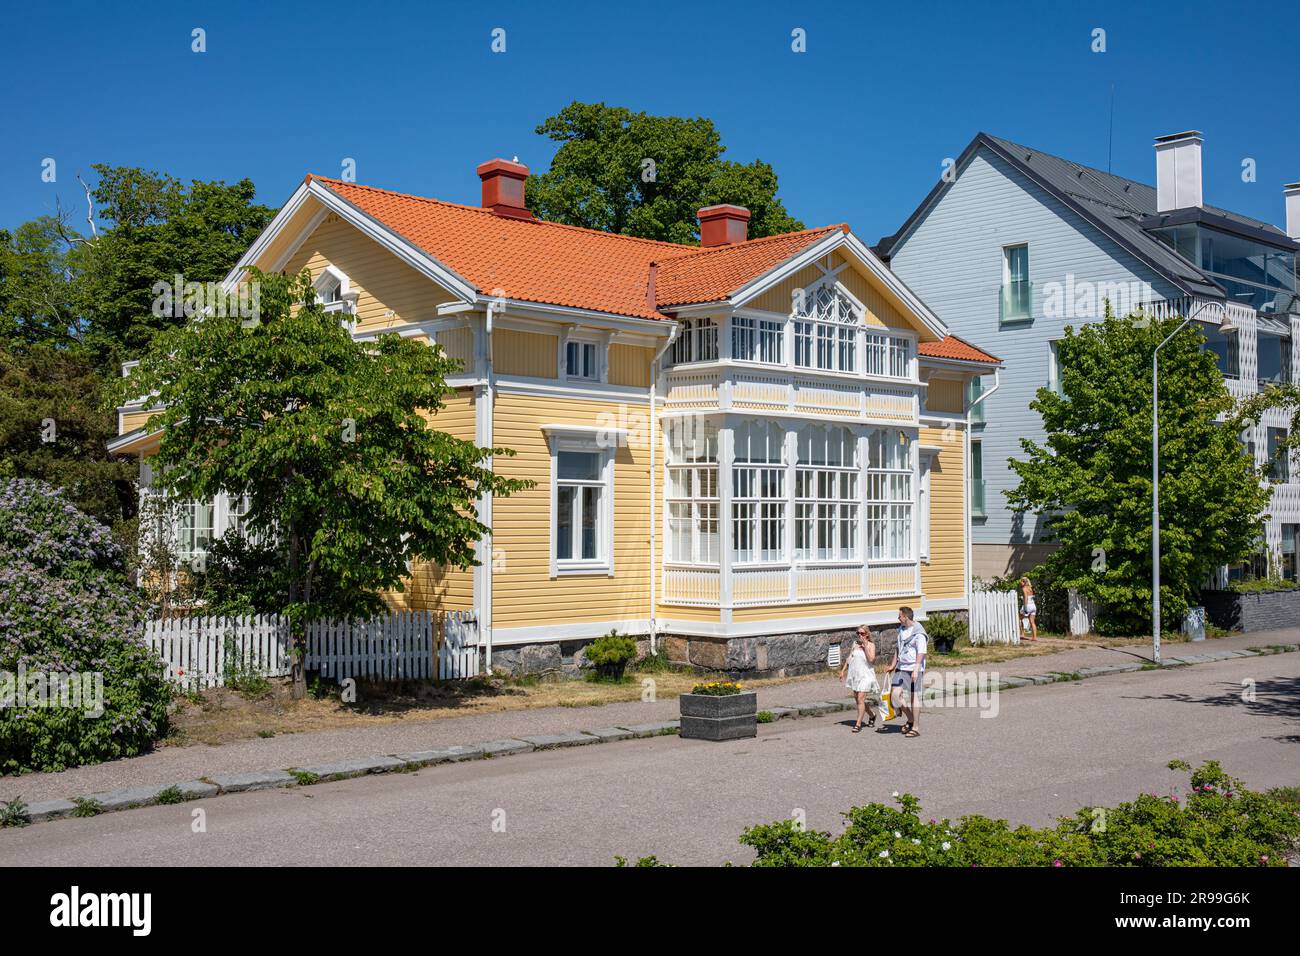 Old yellow wooden house or residential building on a sunny summer day at Merikatu in Hanko, Finland Stock Photo